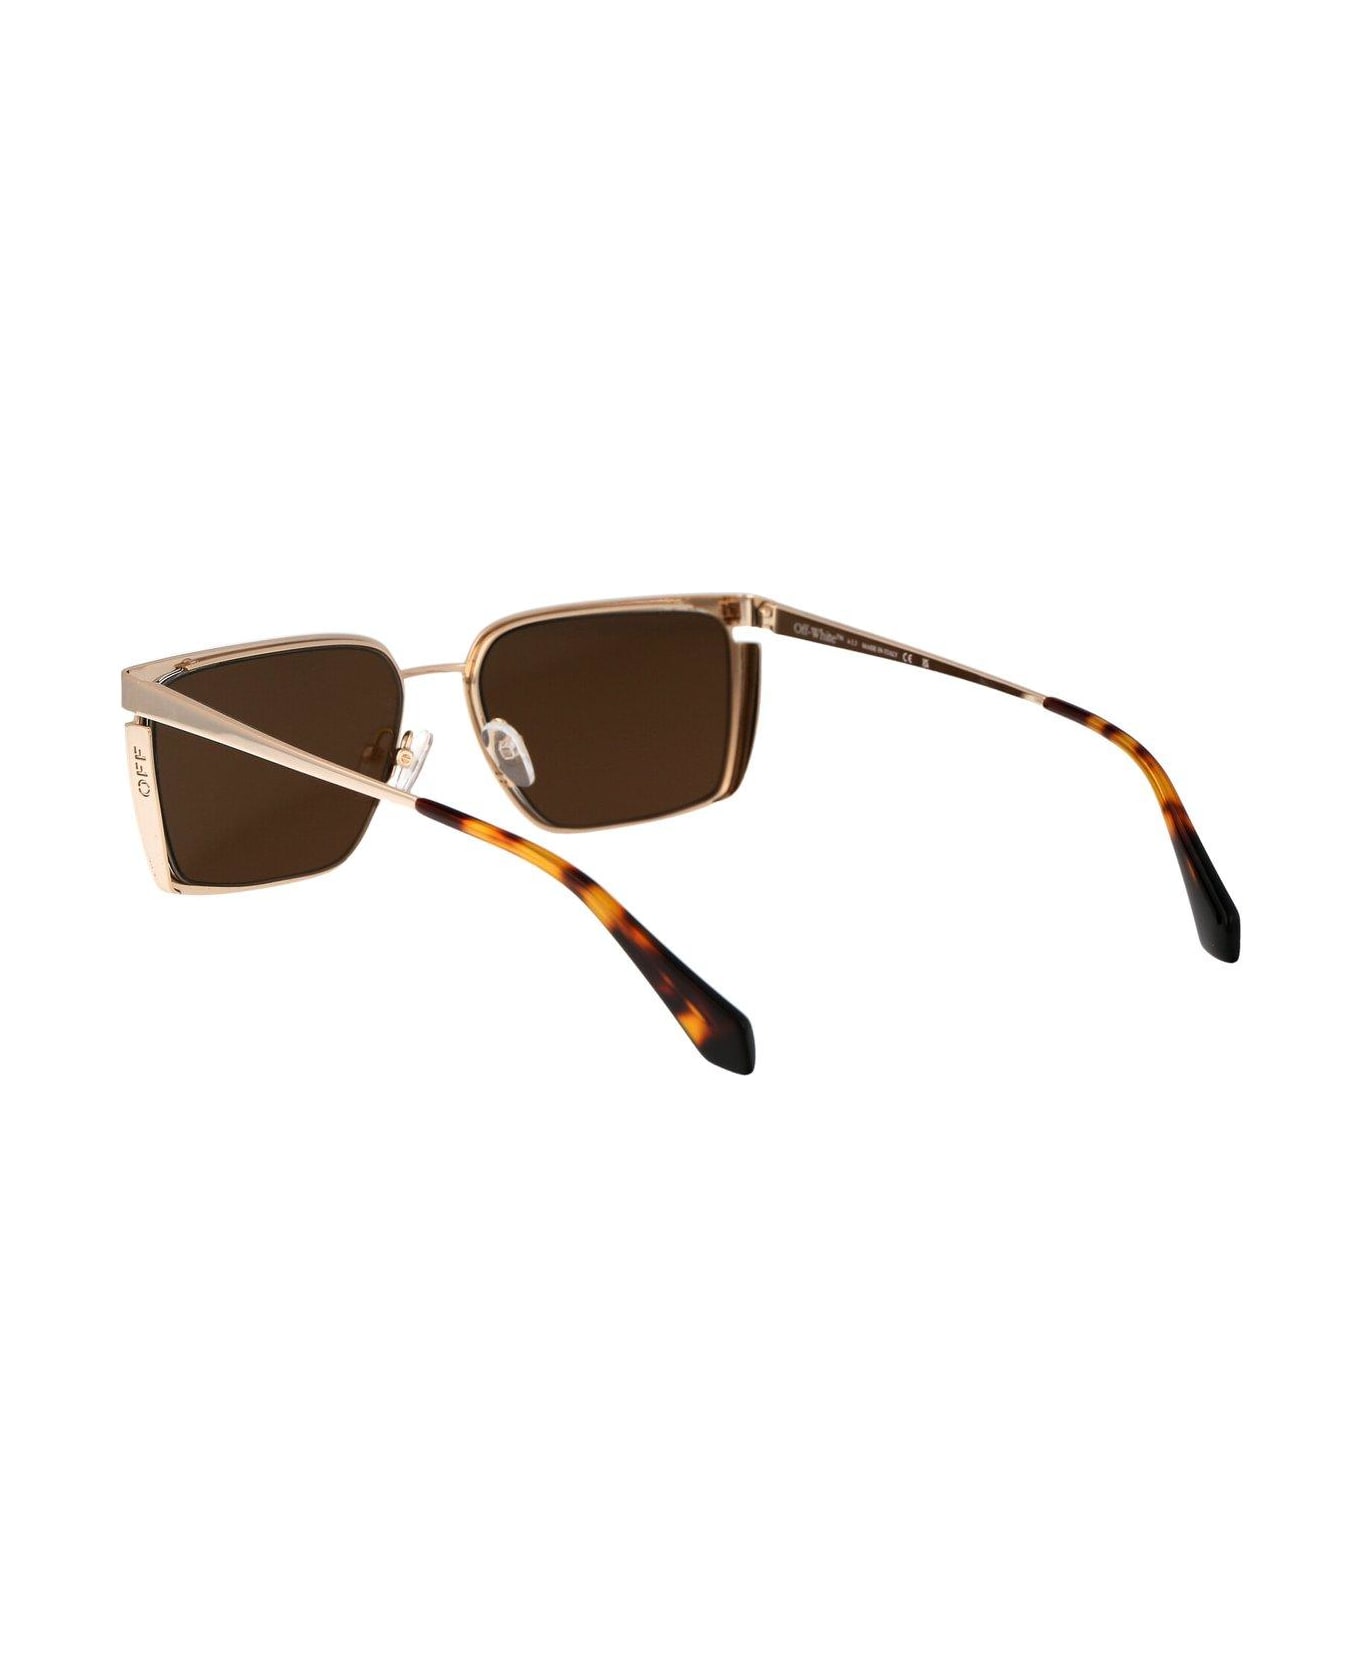 Off-White Yoder Sunglasses - 7676 GOLD GOLD サングラス